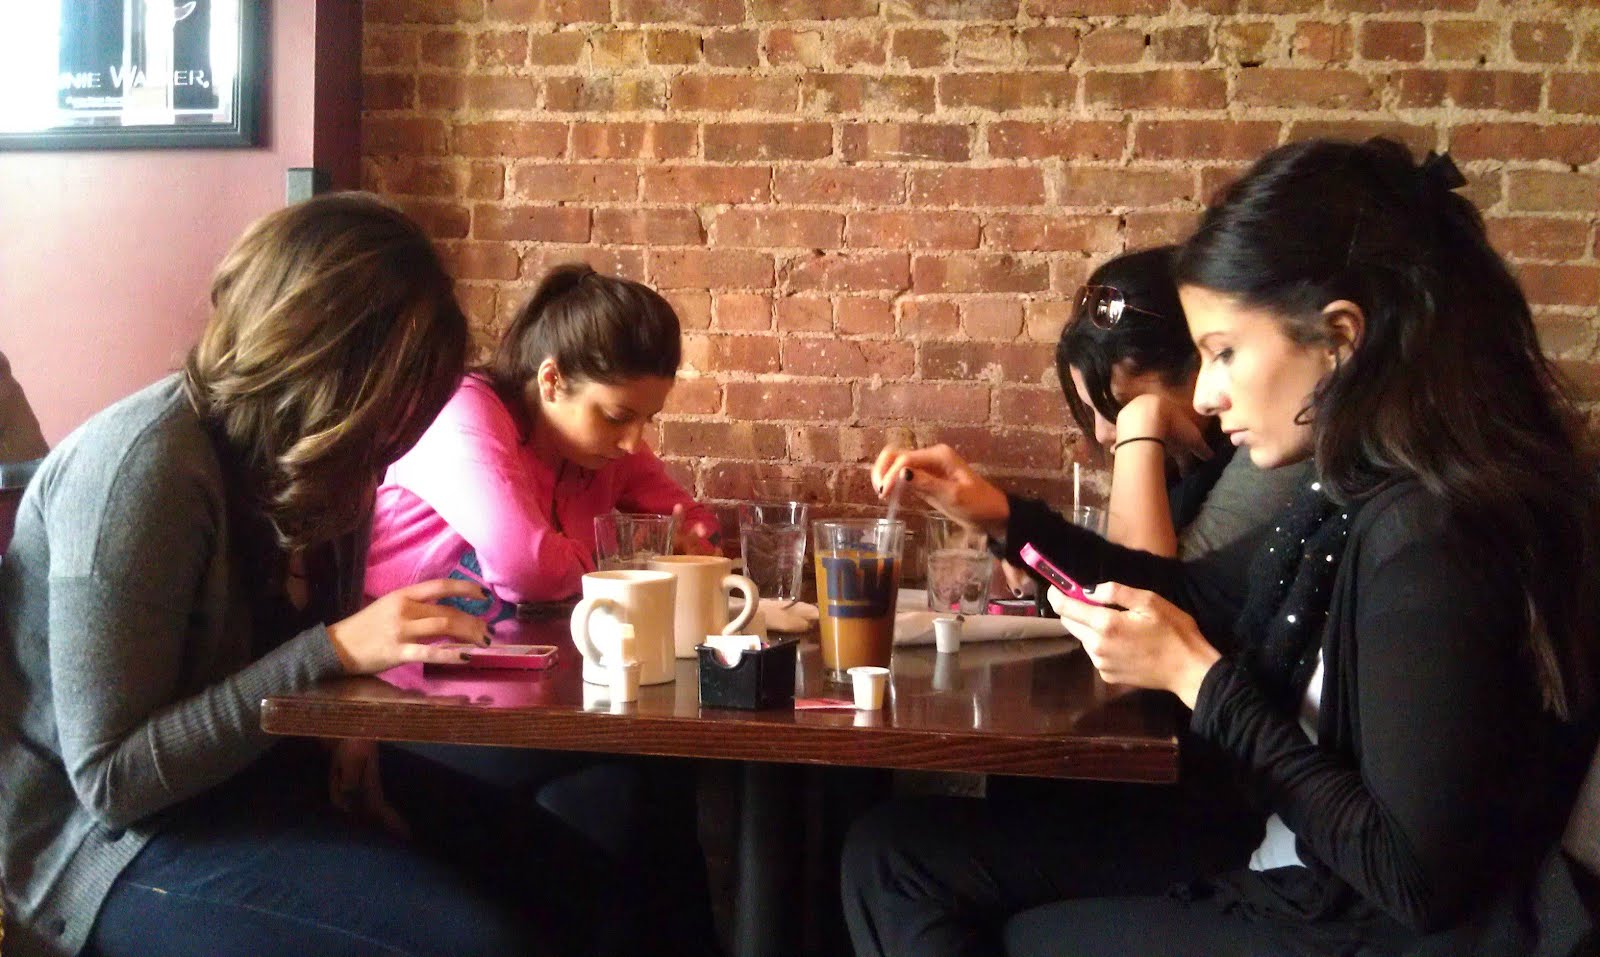 Friends checking phones